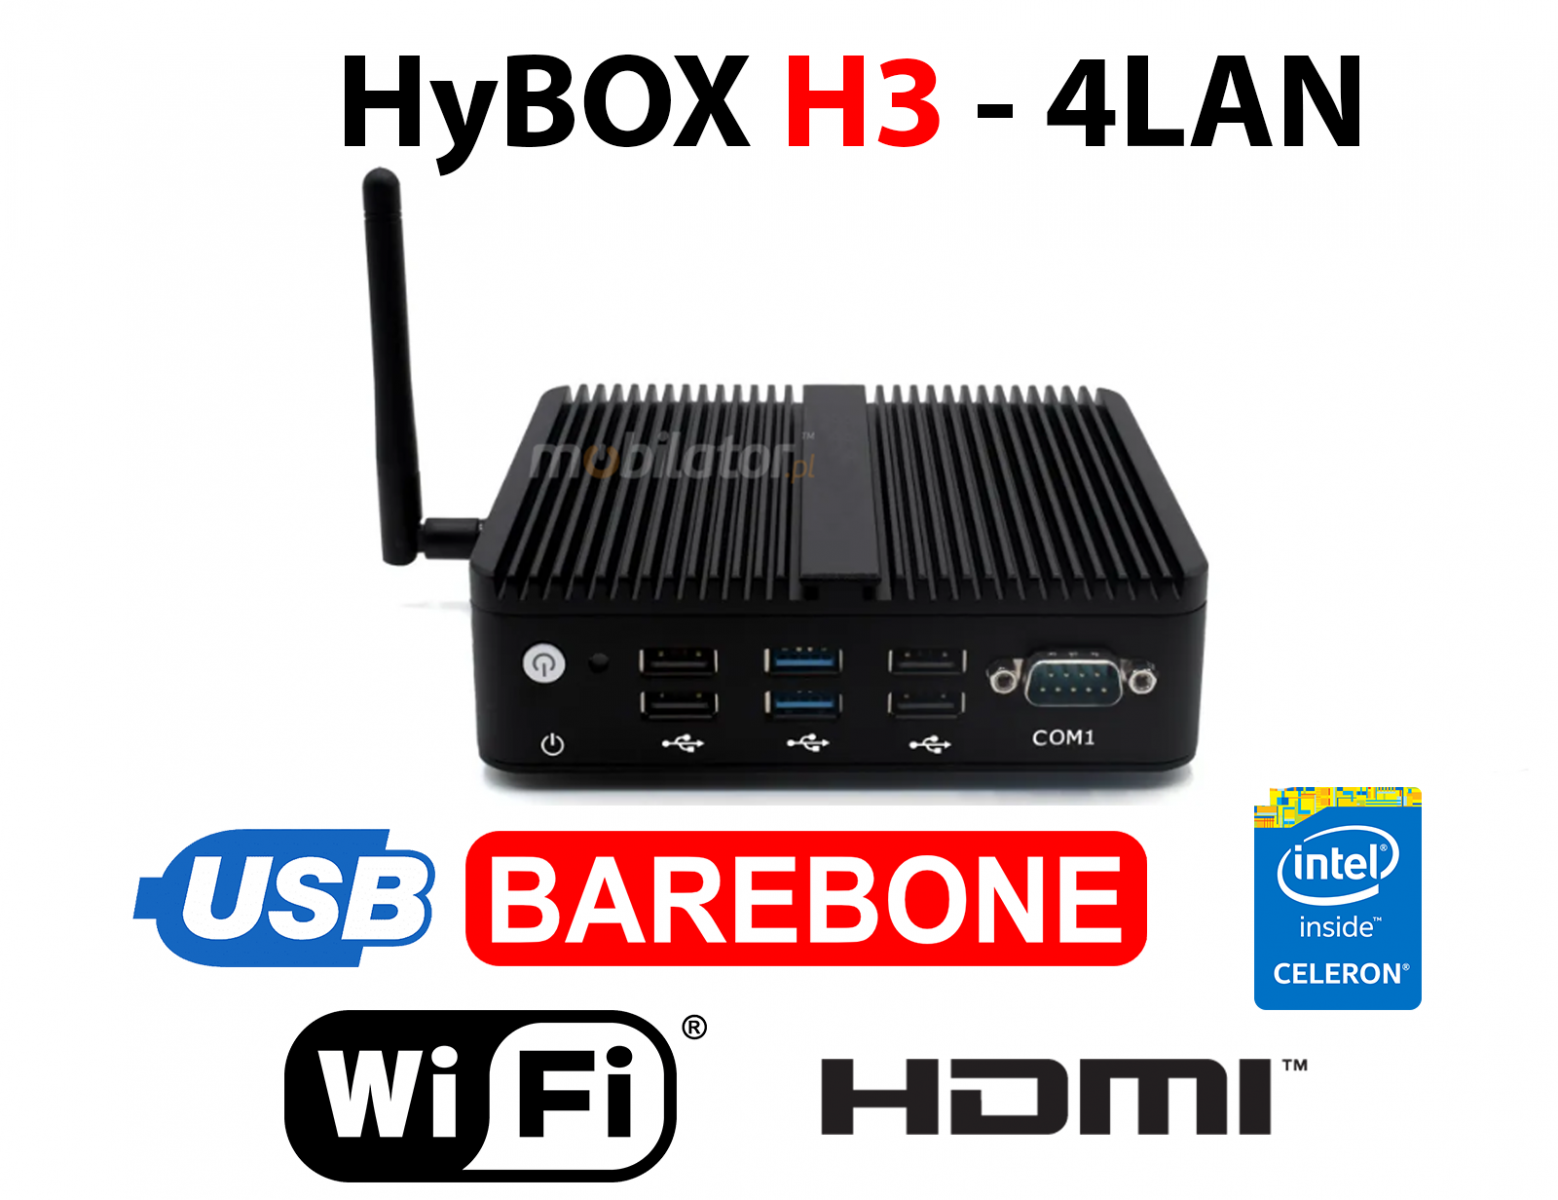 HyBOX H3-4LAN small reliable fast and efficient mini pc Linux